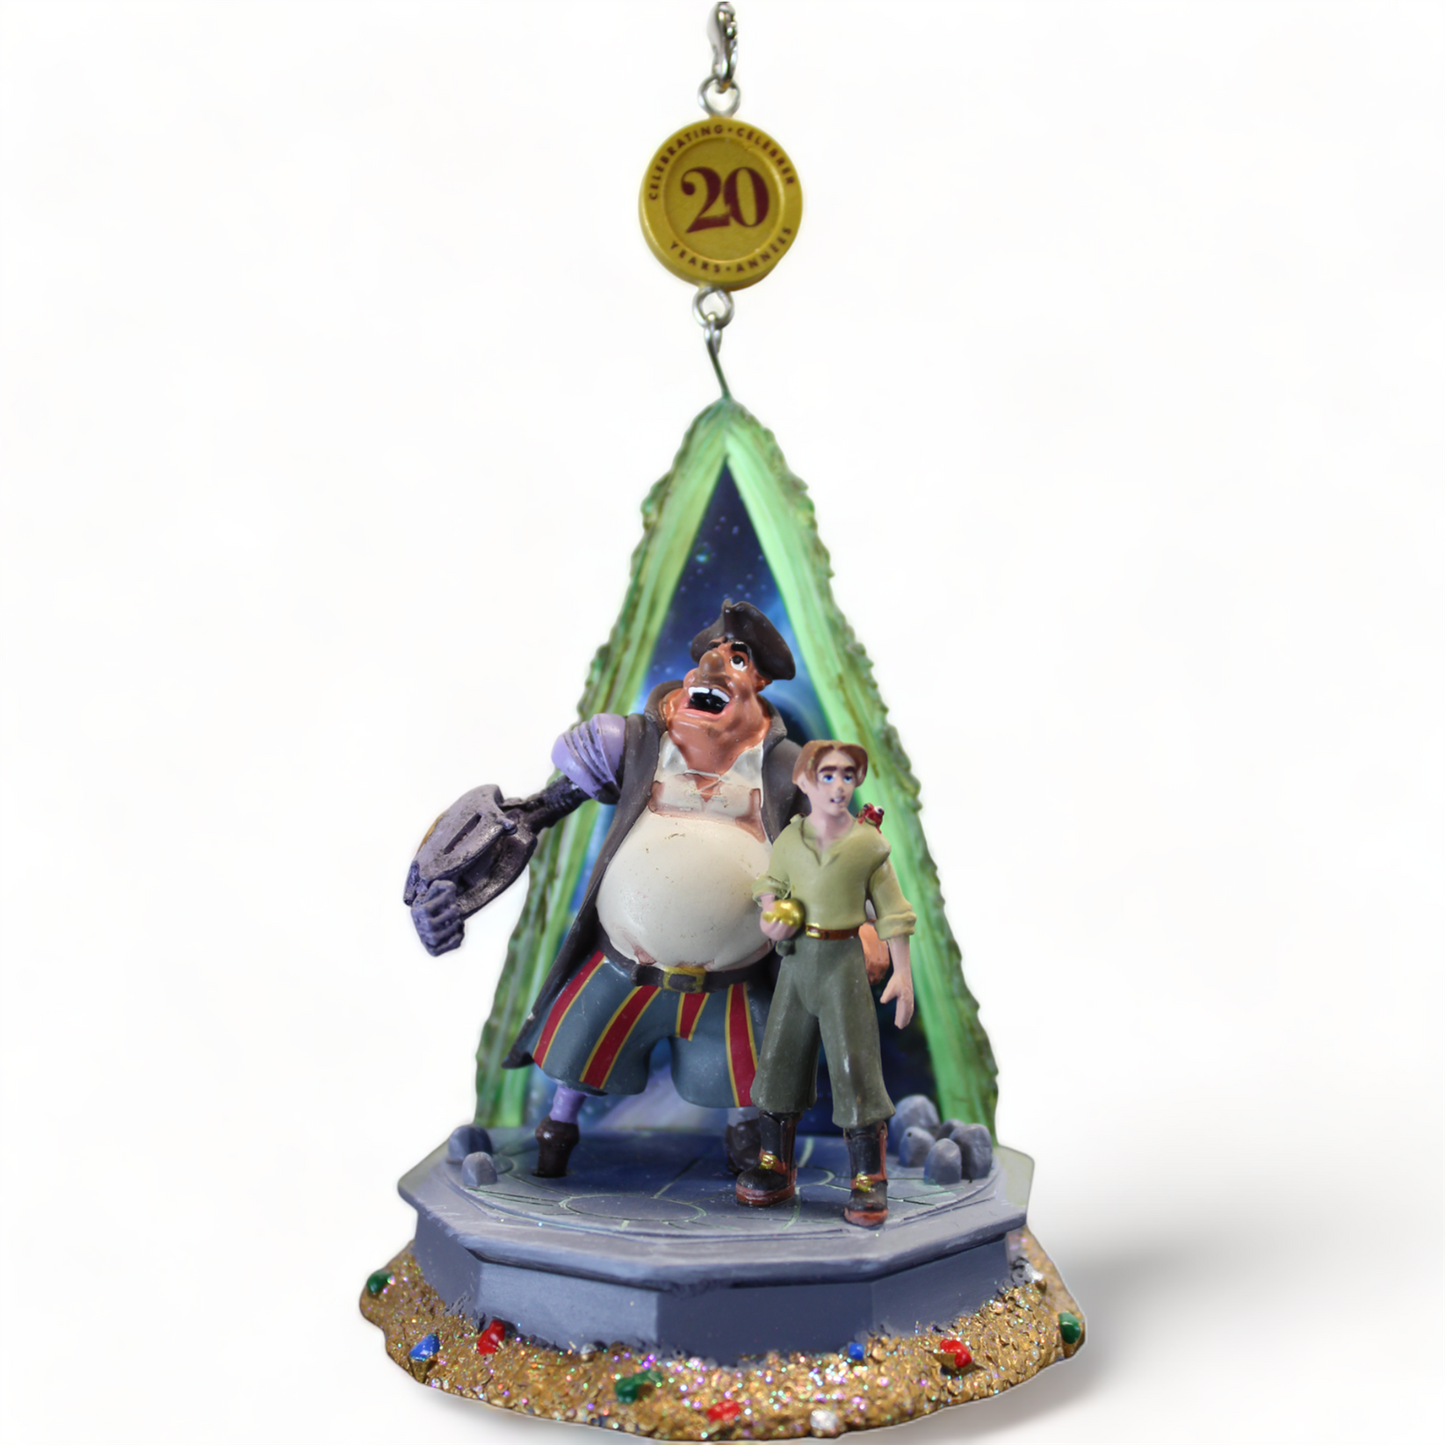 Disney's Treasure Planet Sketchbook 20th Anniversary Ornament, Limited Release